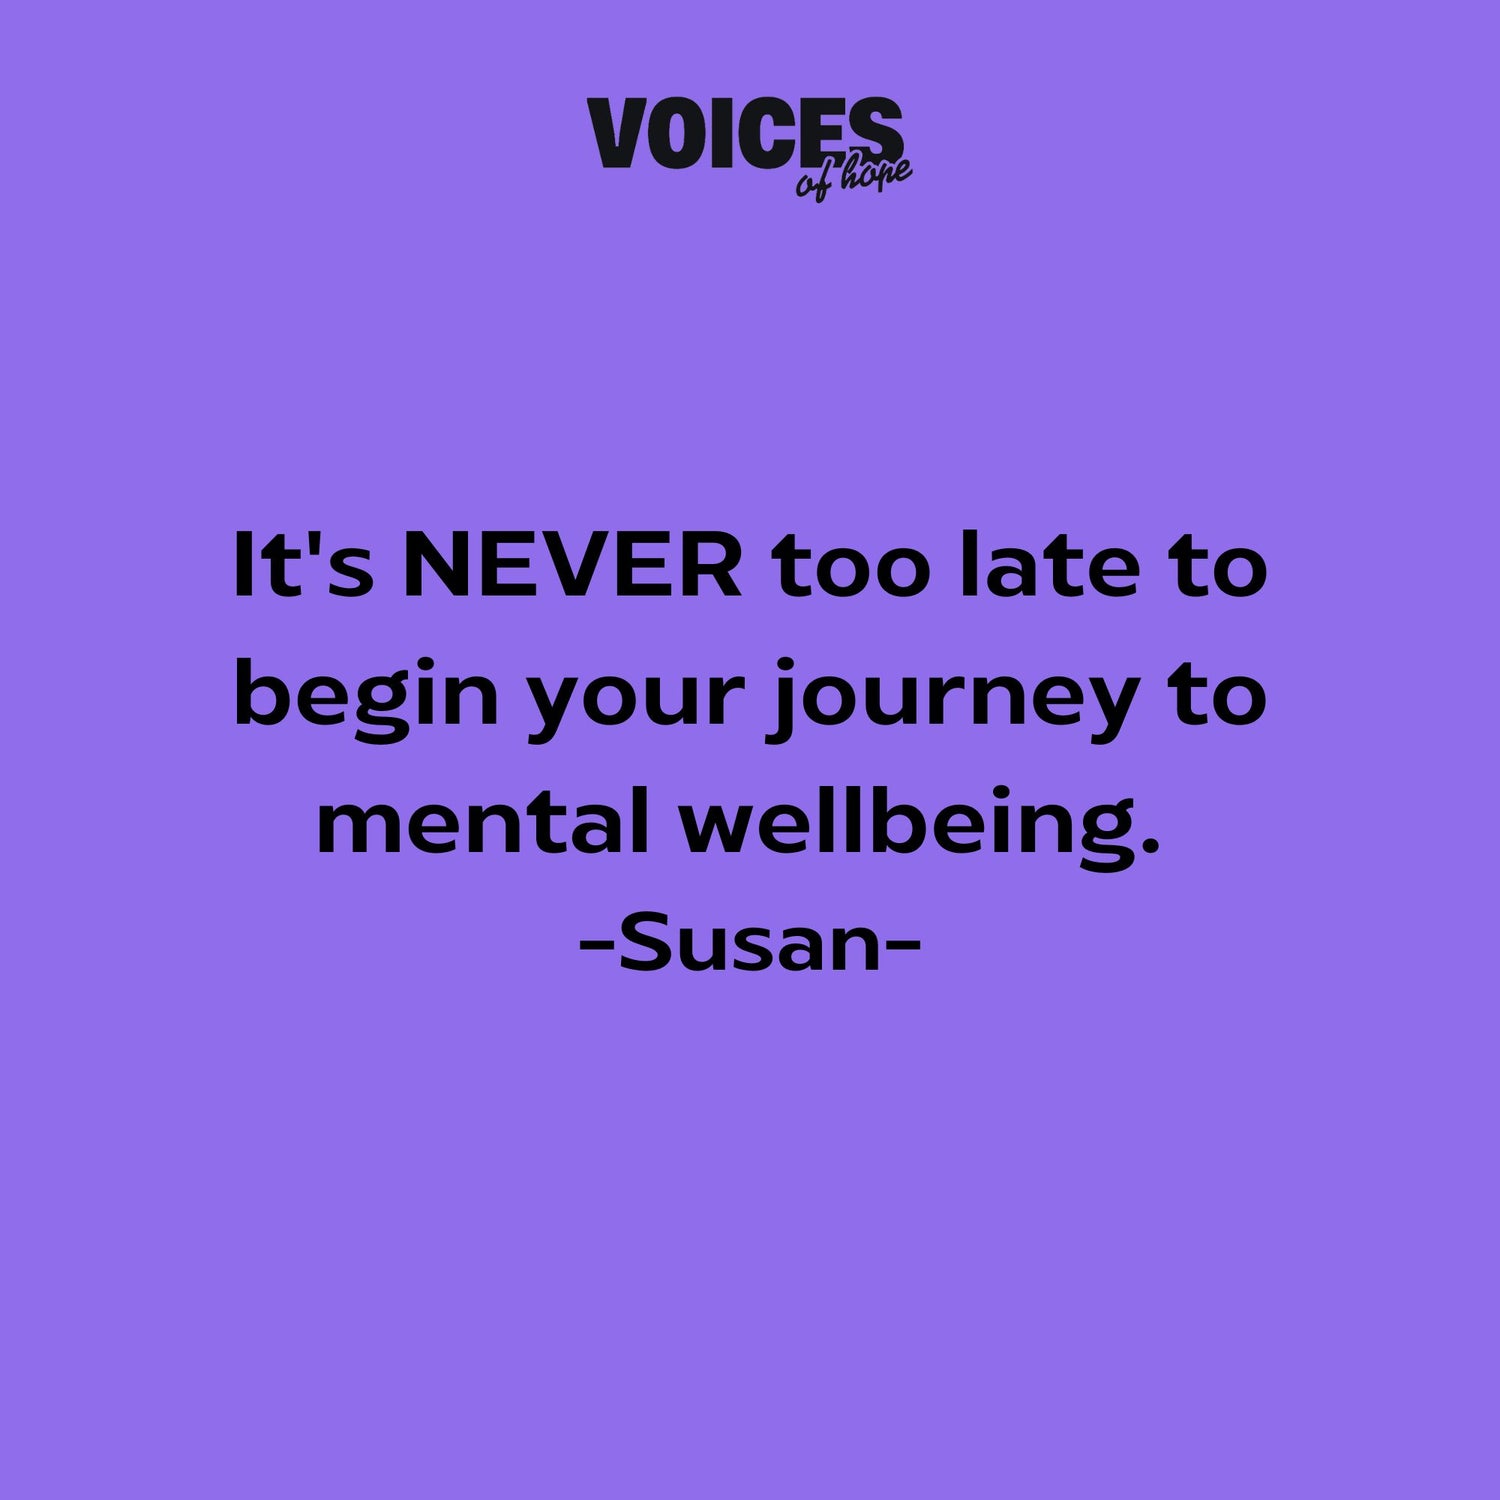 Purple background with black writing that reads: "it's NEVER too late to begin your journey to mental wellbeing. Susan."